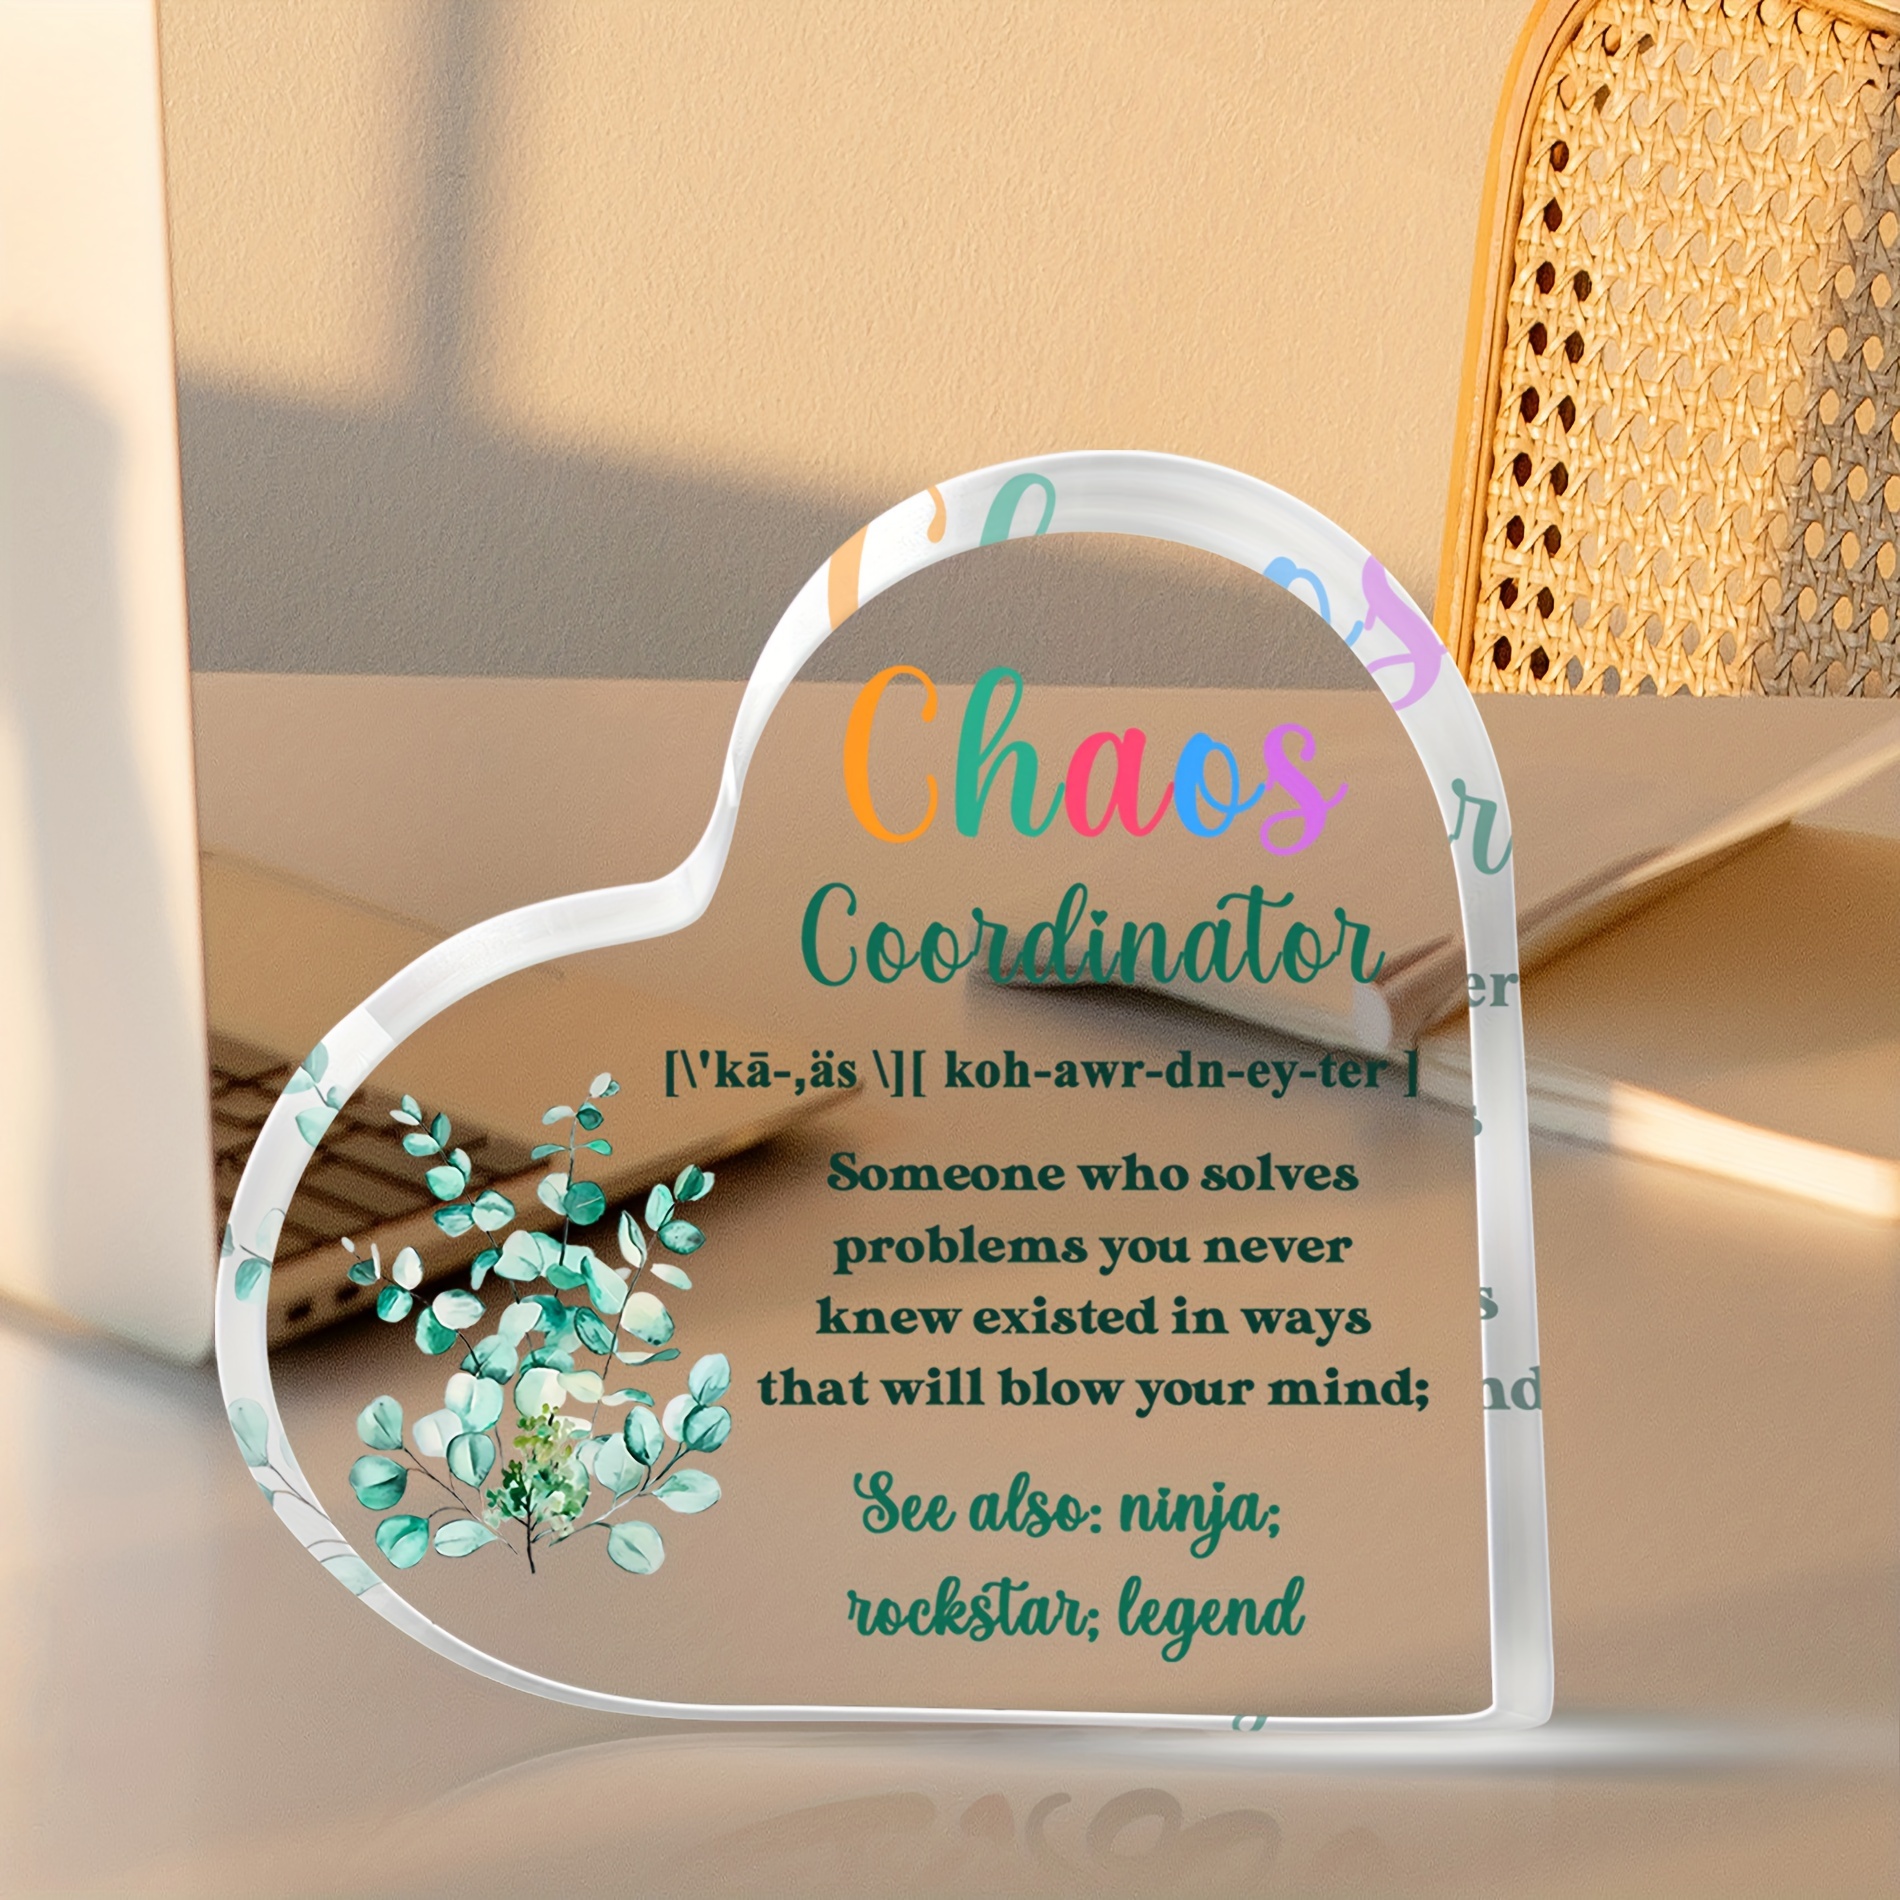 Thank You Gifts For Women Unique Appreciation Gifts For Women, Office  Teacher, Coworker, Boss Lady, Mom - Birthday Gifts Office Chaos Coordinator  Gifts Decorative Desk Sign, Art Craft Ornament Gift, Aesthetic Decor